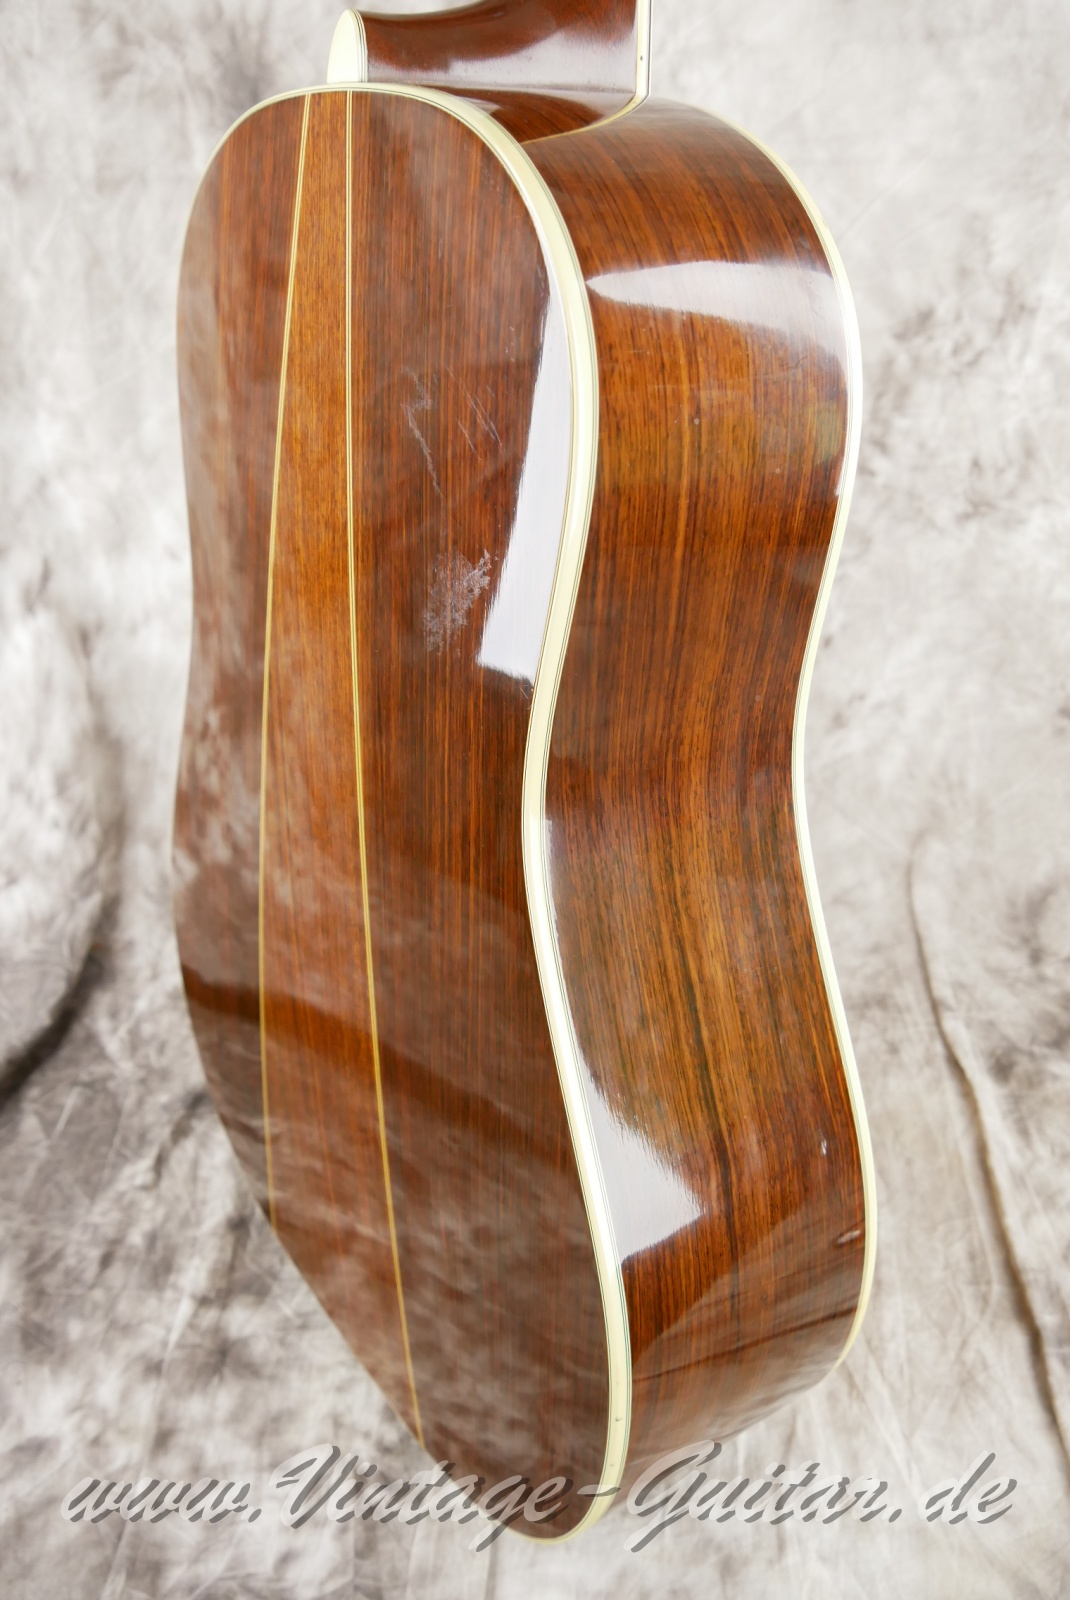 Martin_D_35_S_slotted_headstock_natural_1975-012.JPG